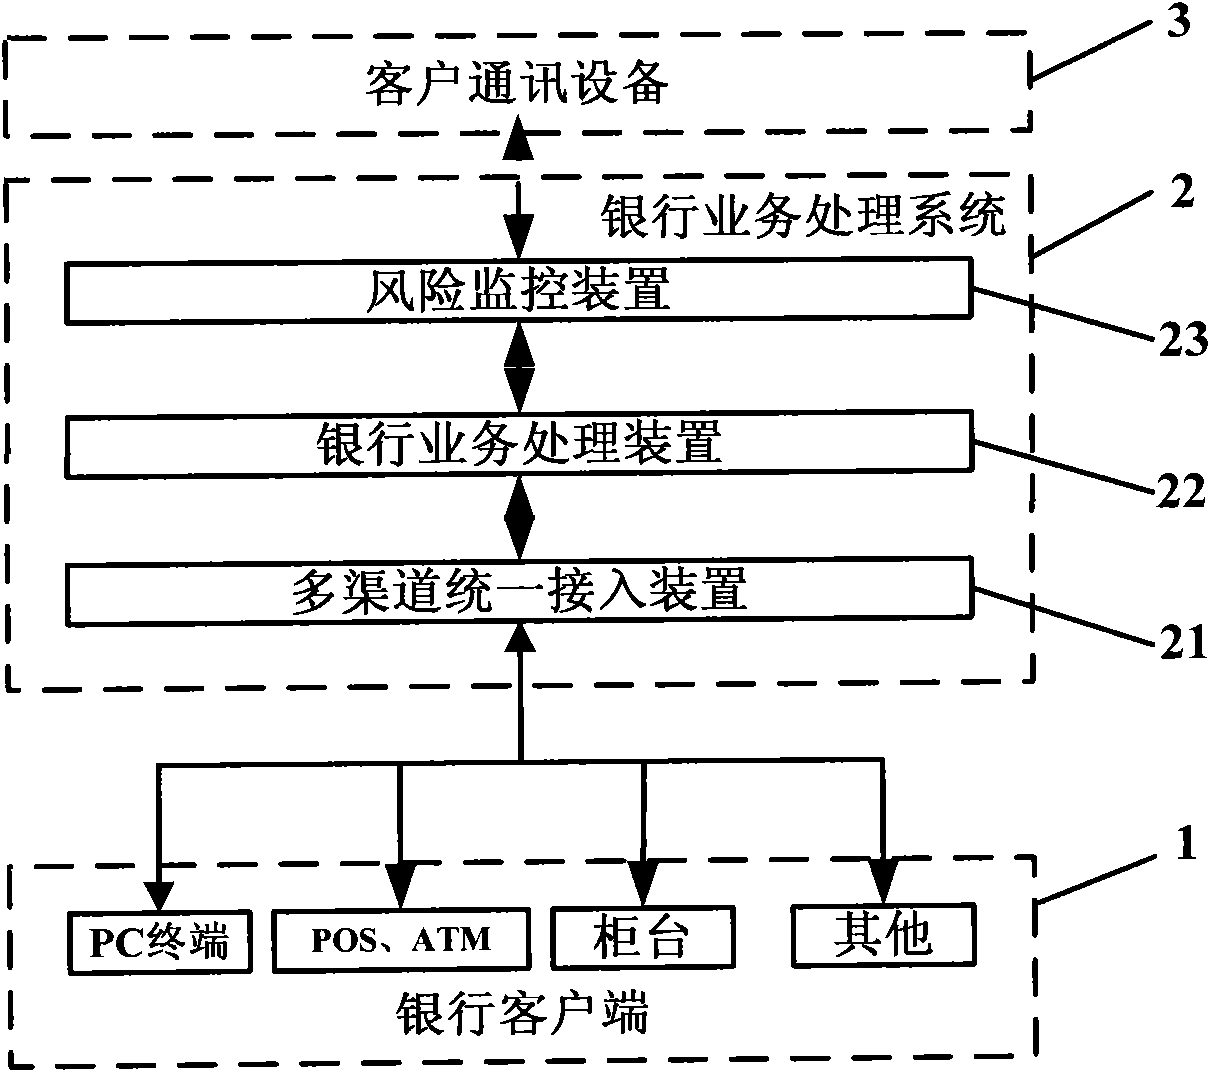 System, device and method for monitoring risks in bank login process